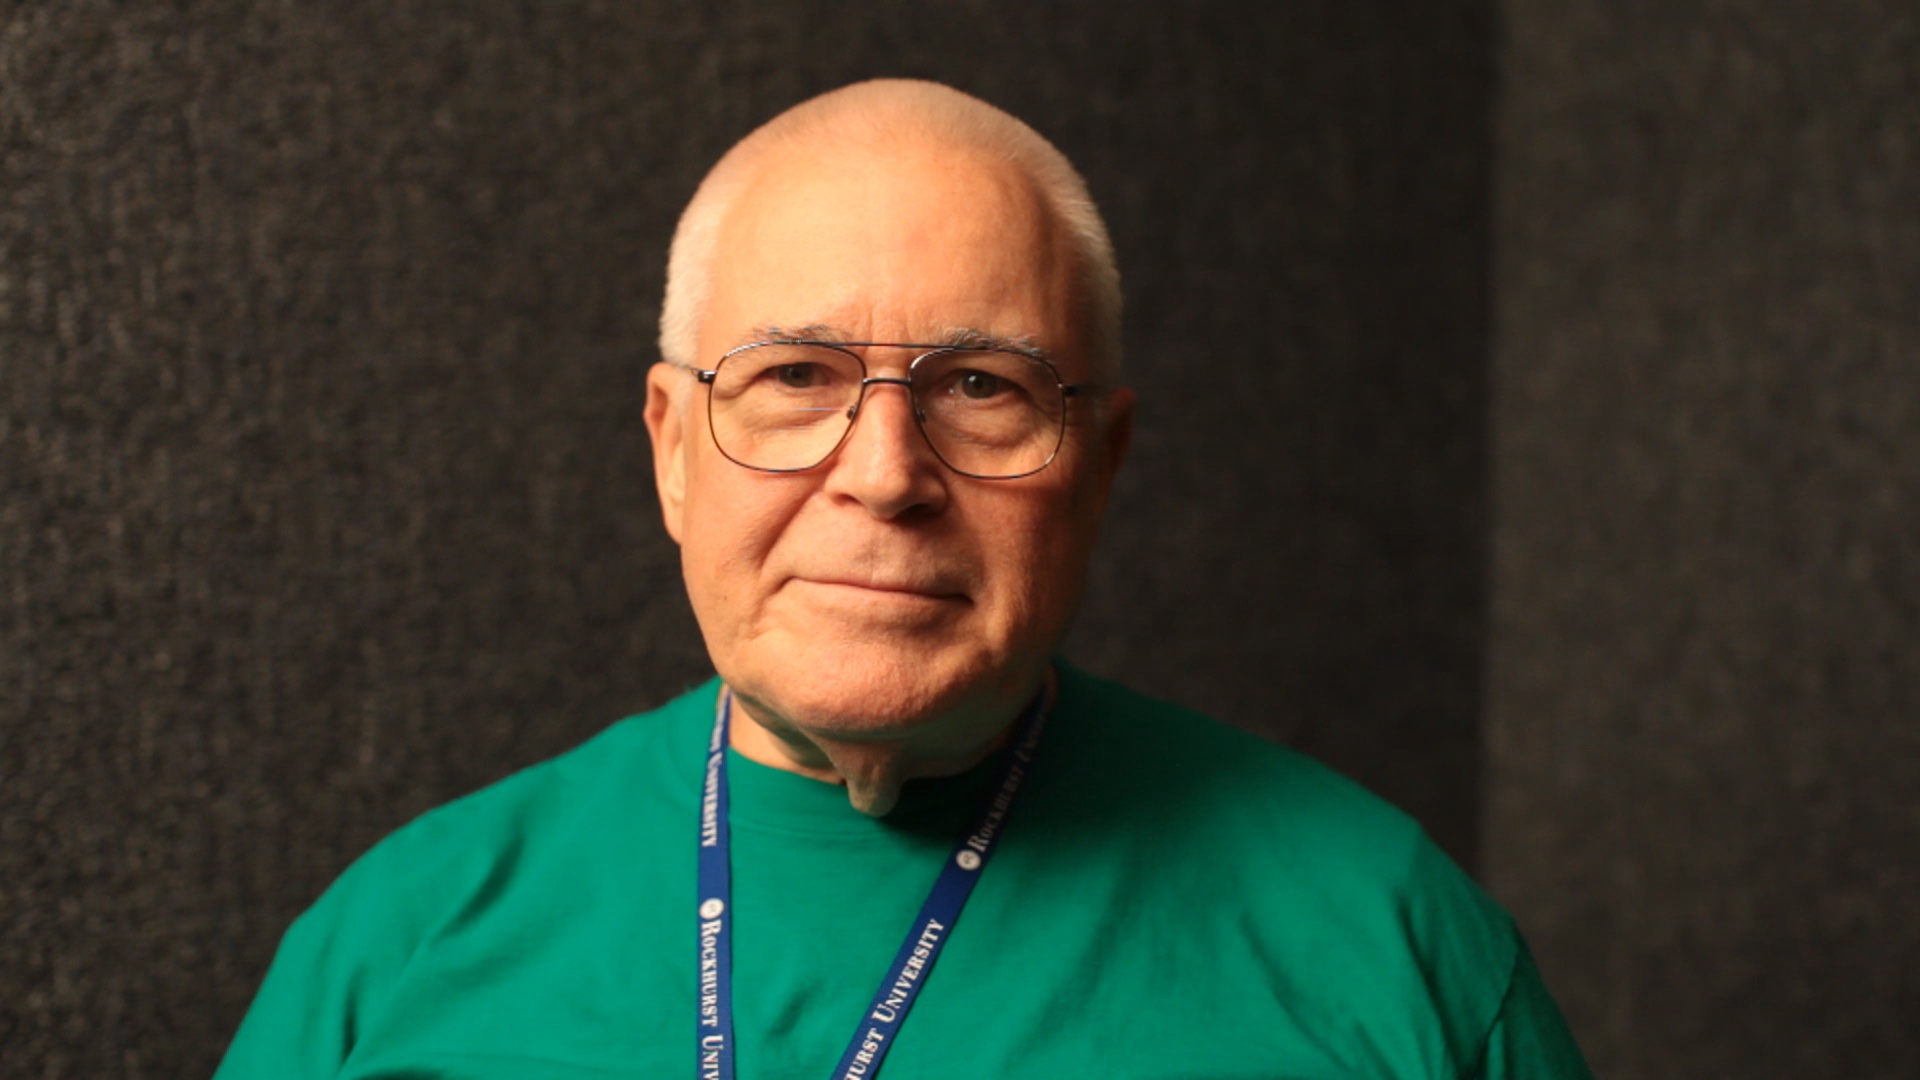 an older man wearing glasses and a green shirt